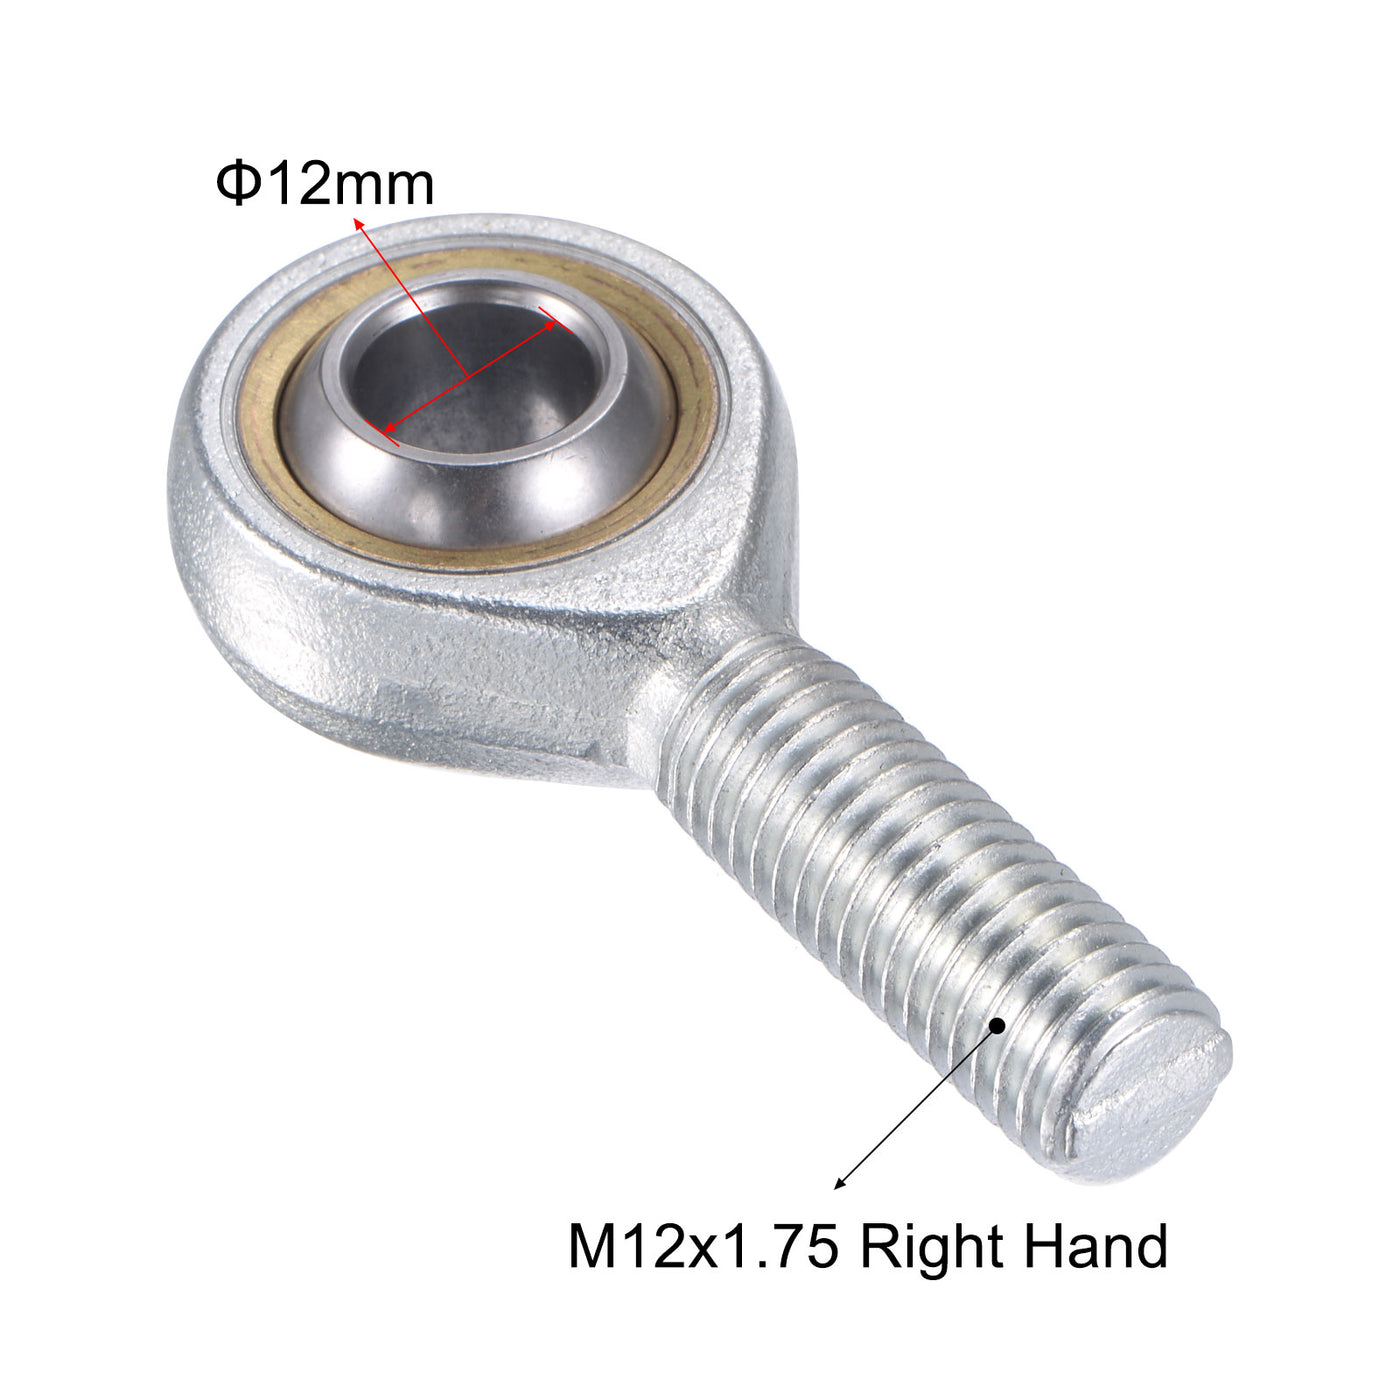 uxcell Uxcell SA5TK POSA5 Rod End Bearing 5mm Bore M5x0.8 Right Hand Male Thread